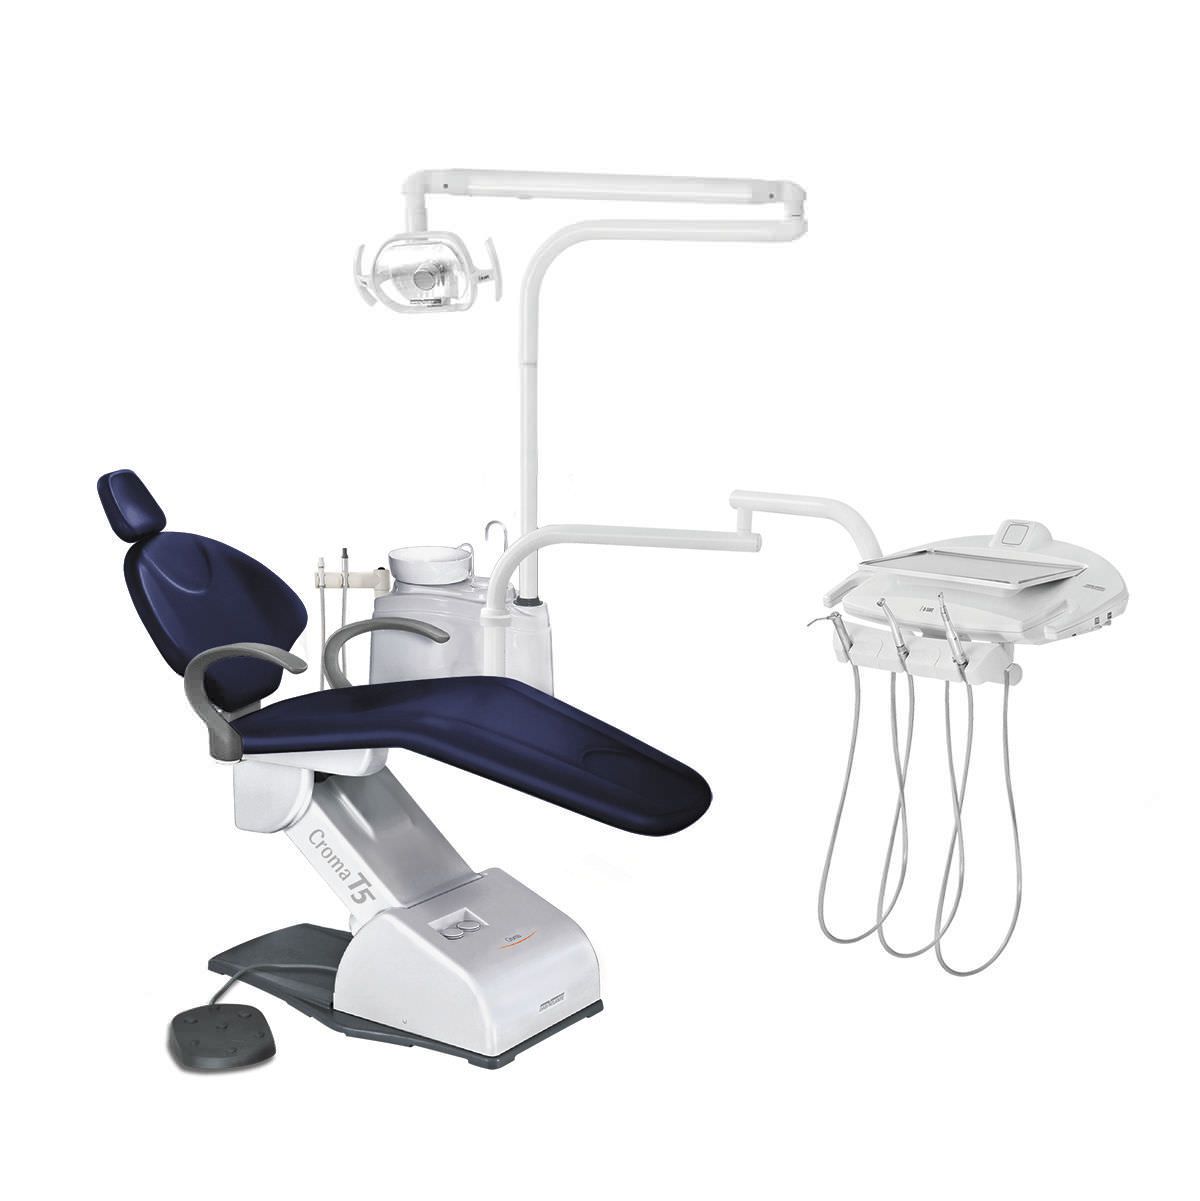 Dental treatment unit with lamp / with delivery system CROMA T5 PLUS DABI ATLANTE